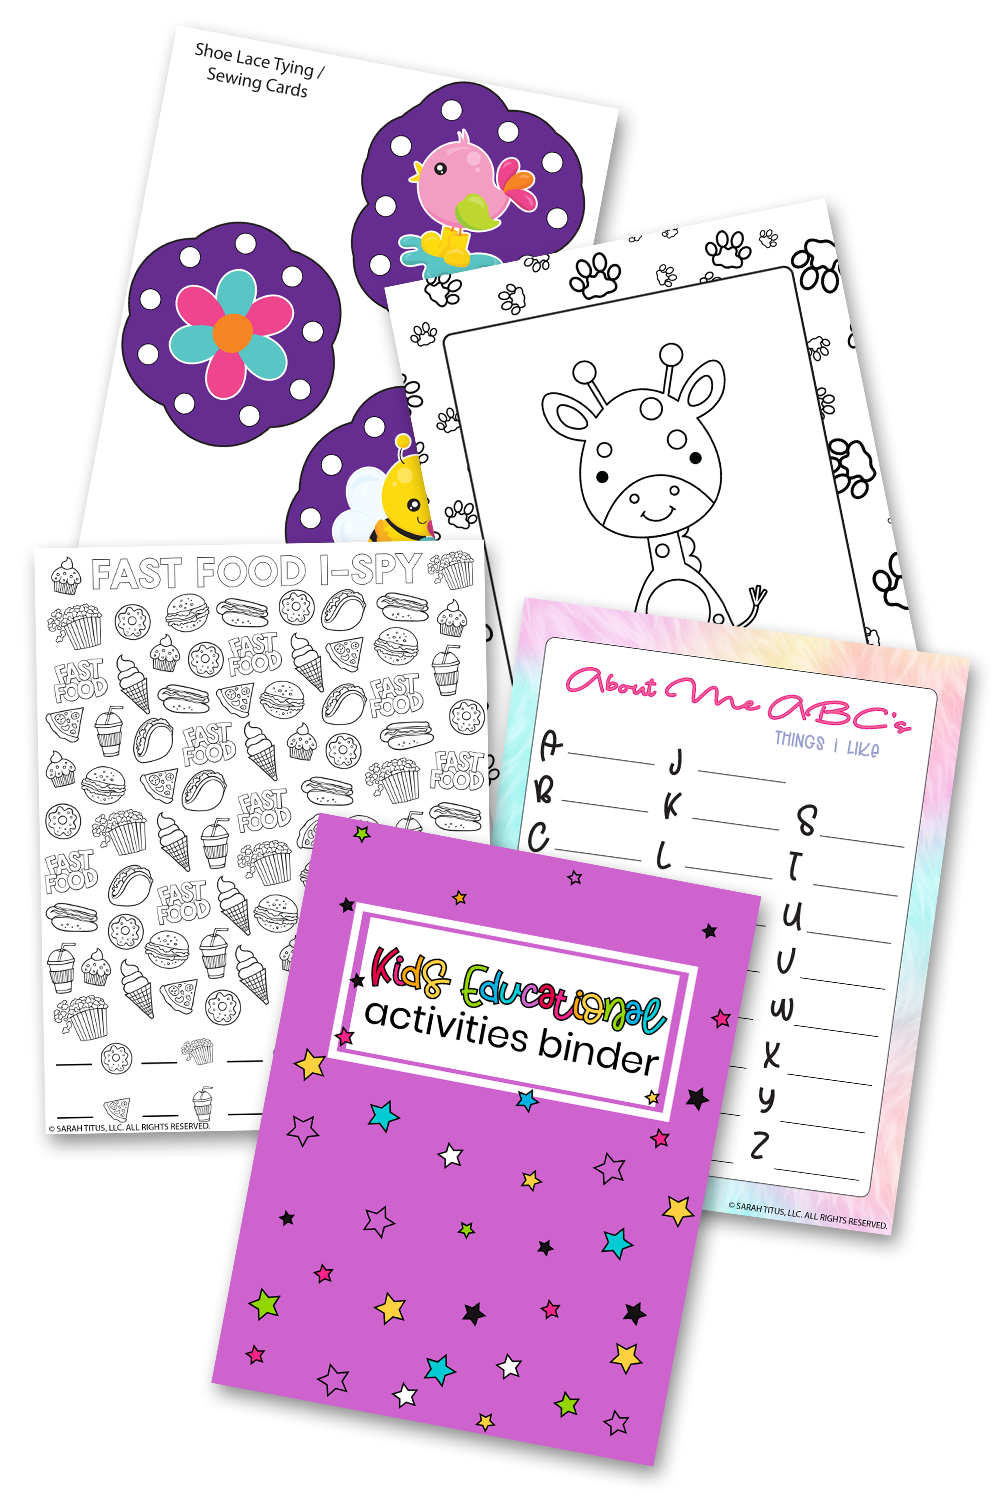 Kids Educational Activities Binder {350+ pages}